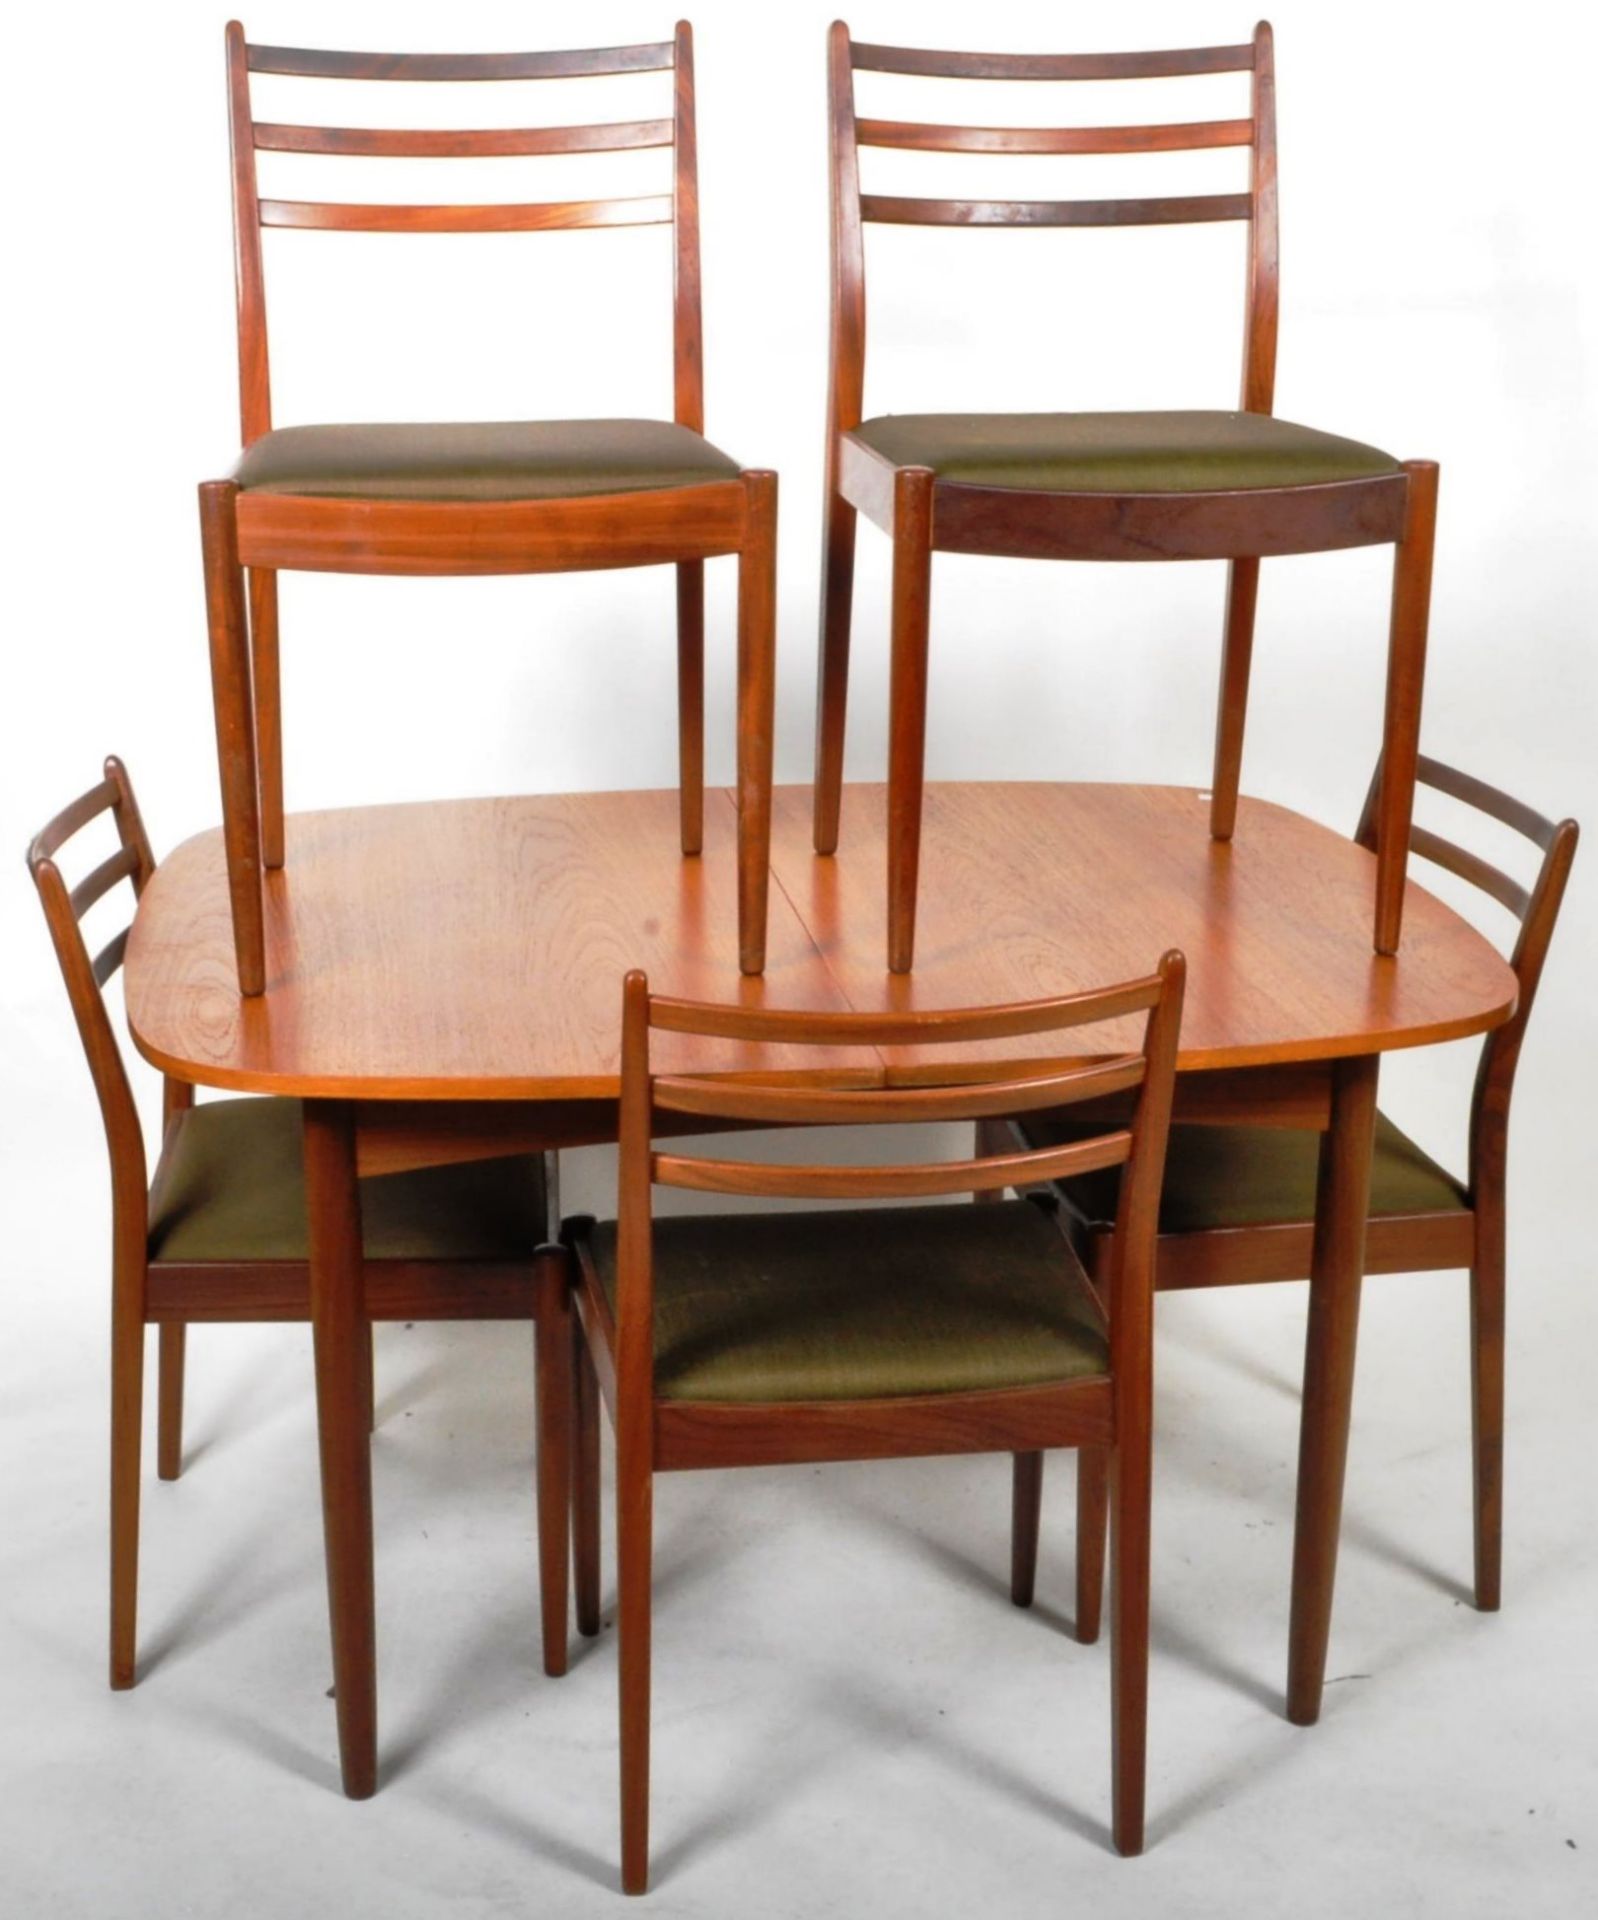 ERNEST GOMME - G PLAN - MID 20TH CENTURY TEAK WOOD DINING SUITE - Image 2 of 7